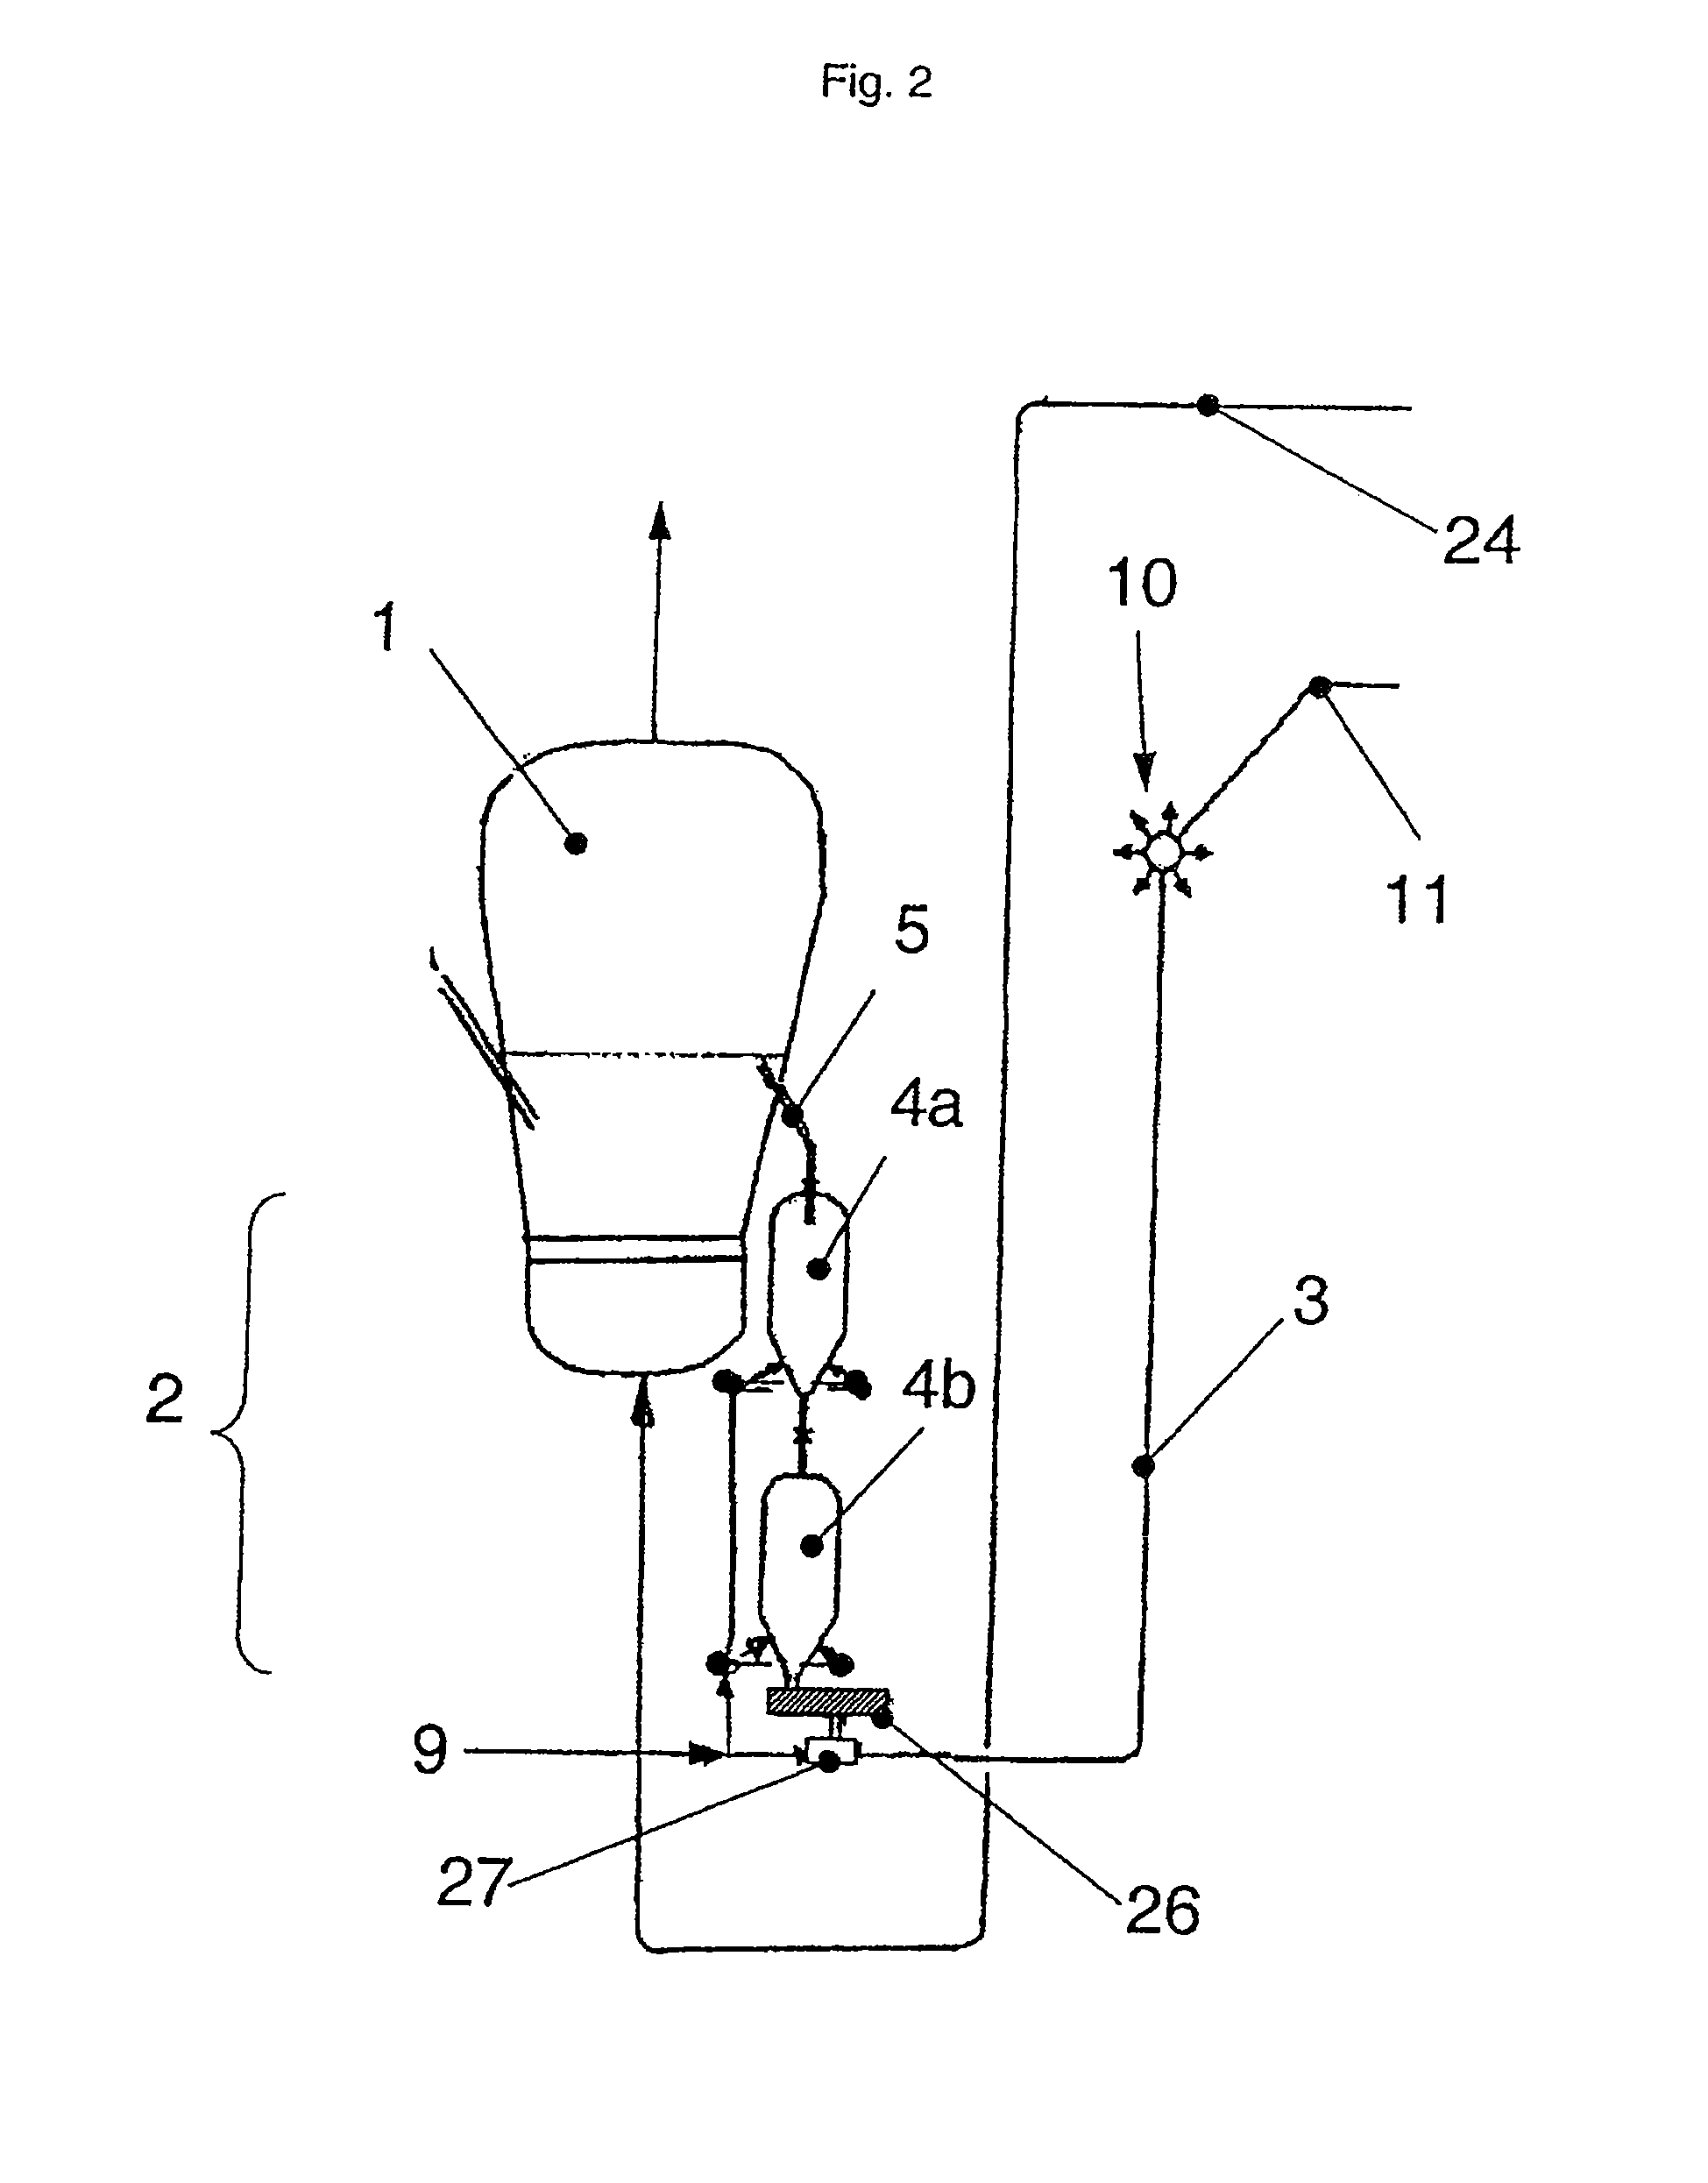 Process and apparatus for producing metals and/or primary metal products